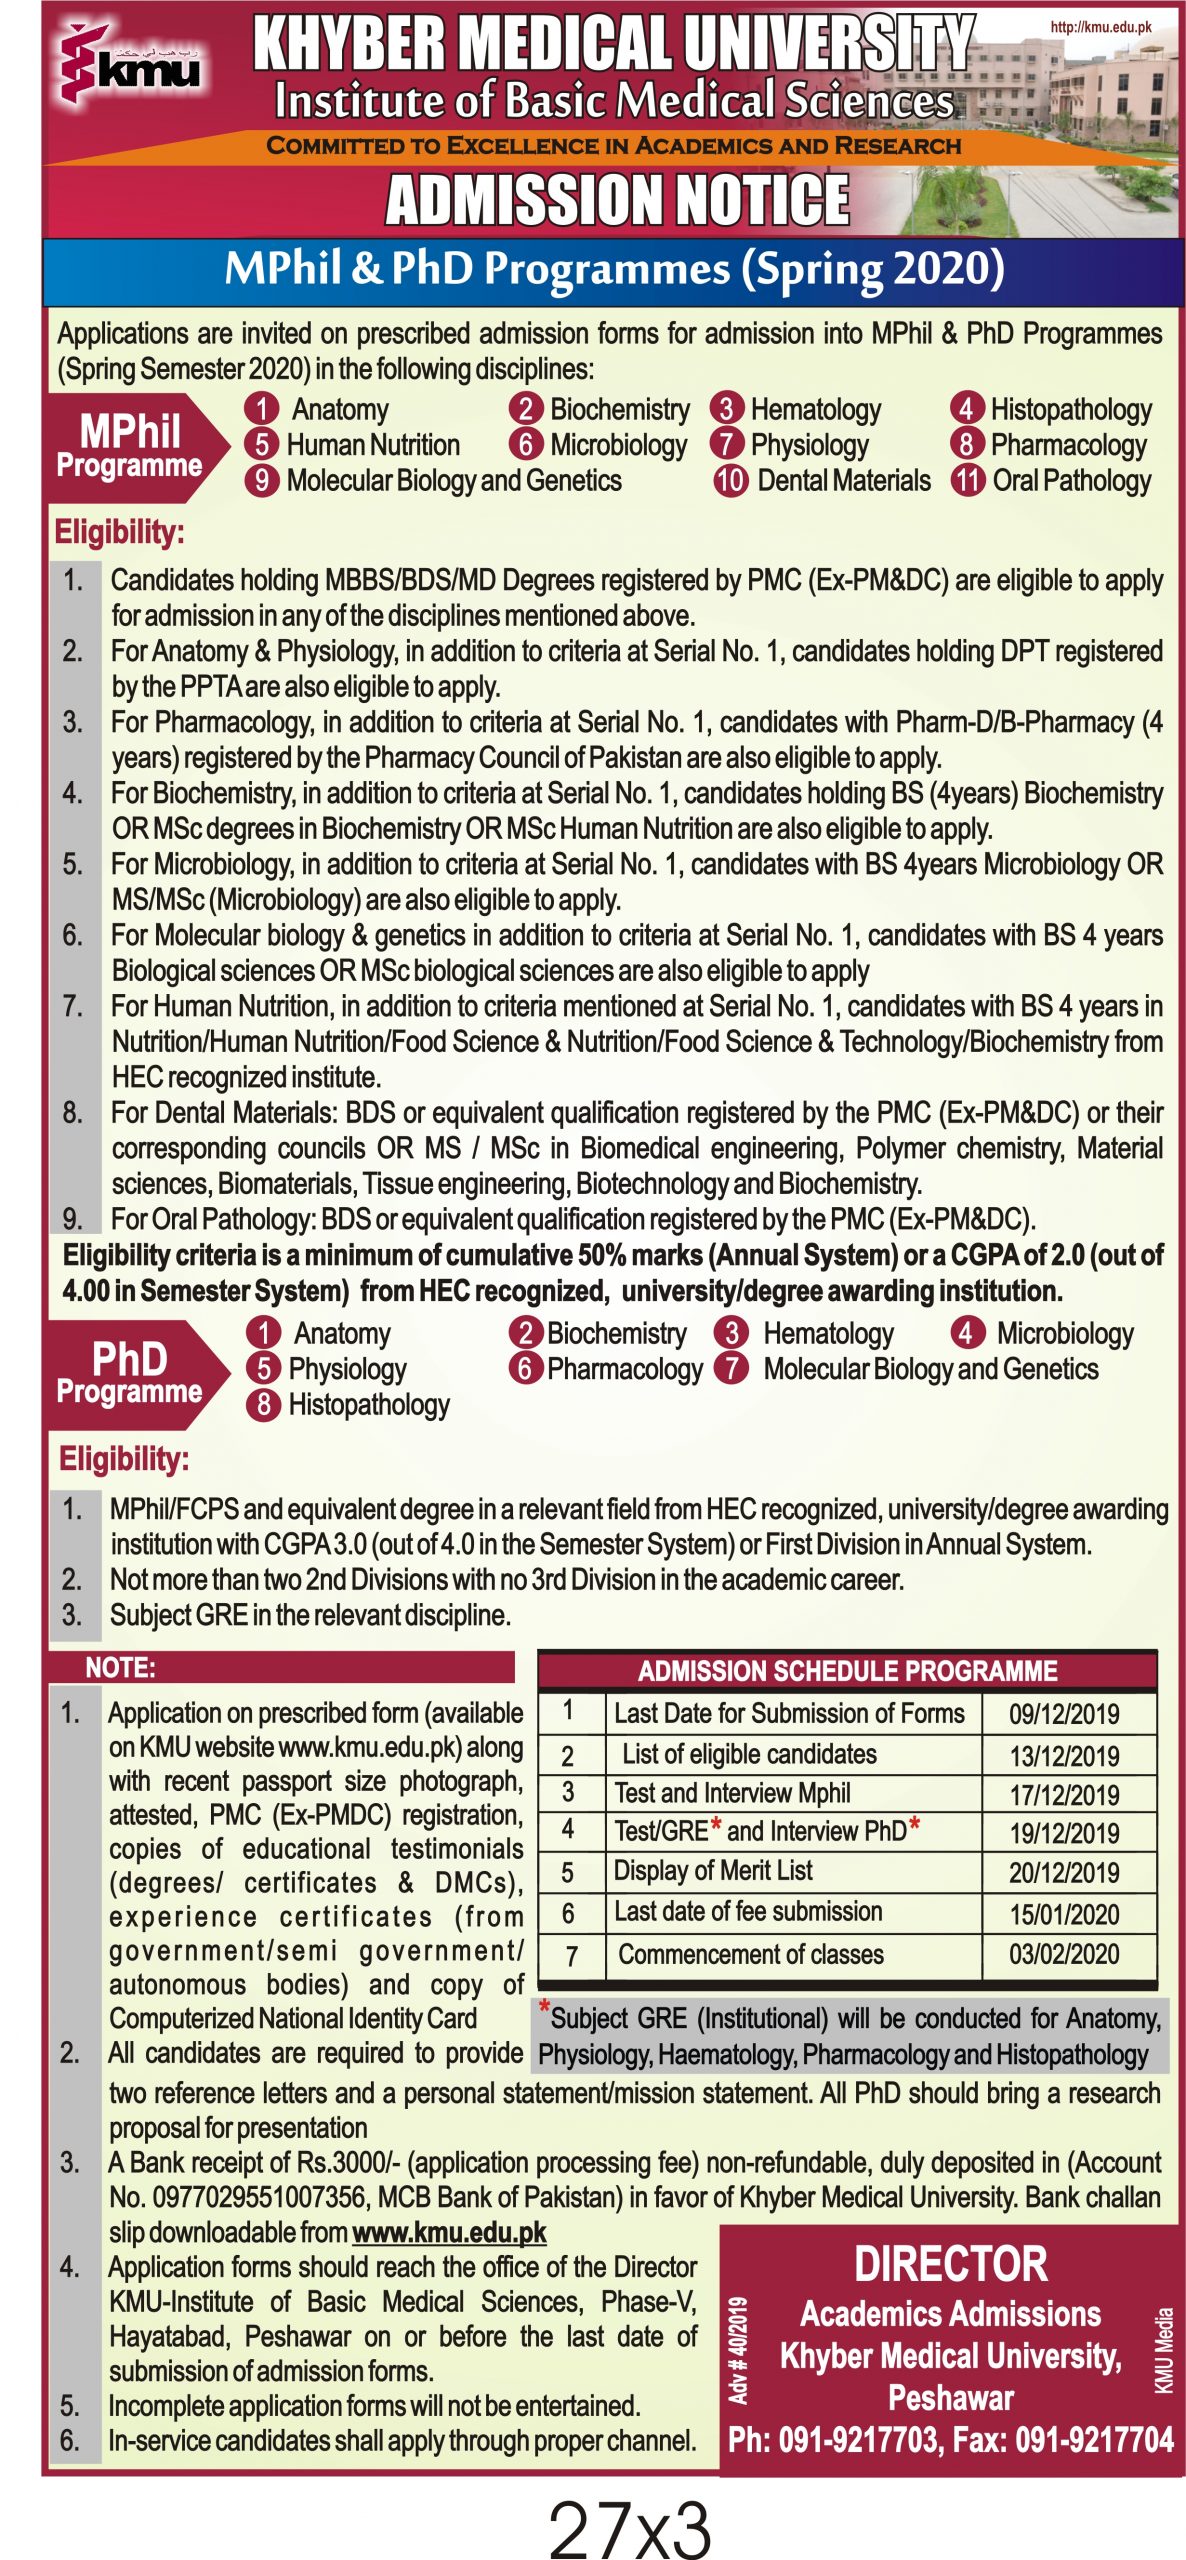 Khyber Medical University MPhil and PhD Admissions Open